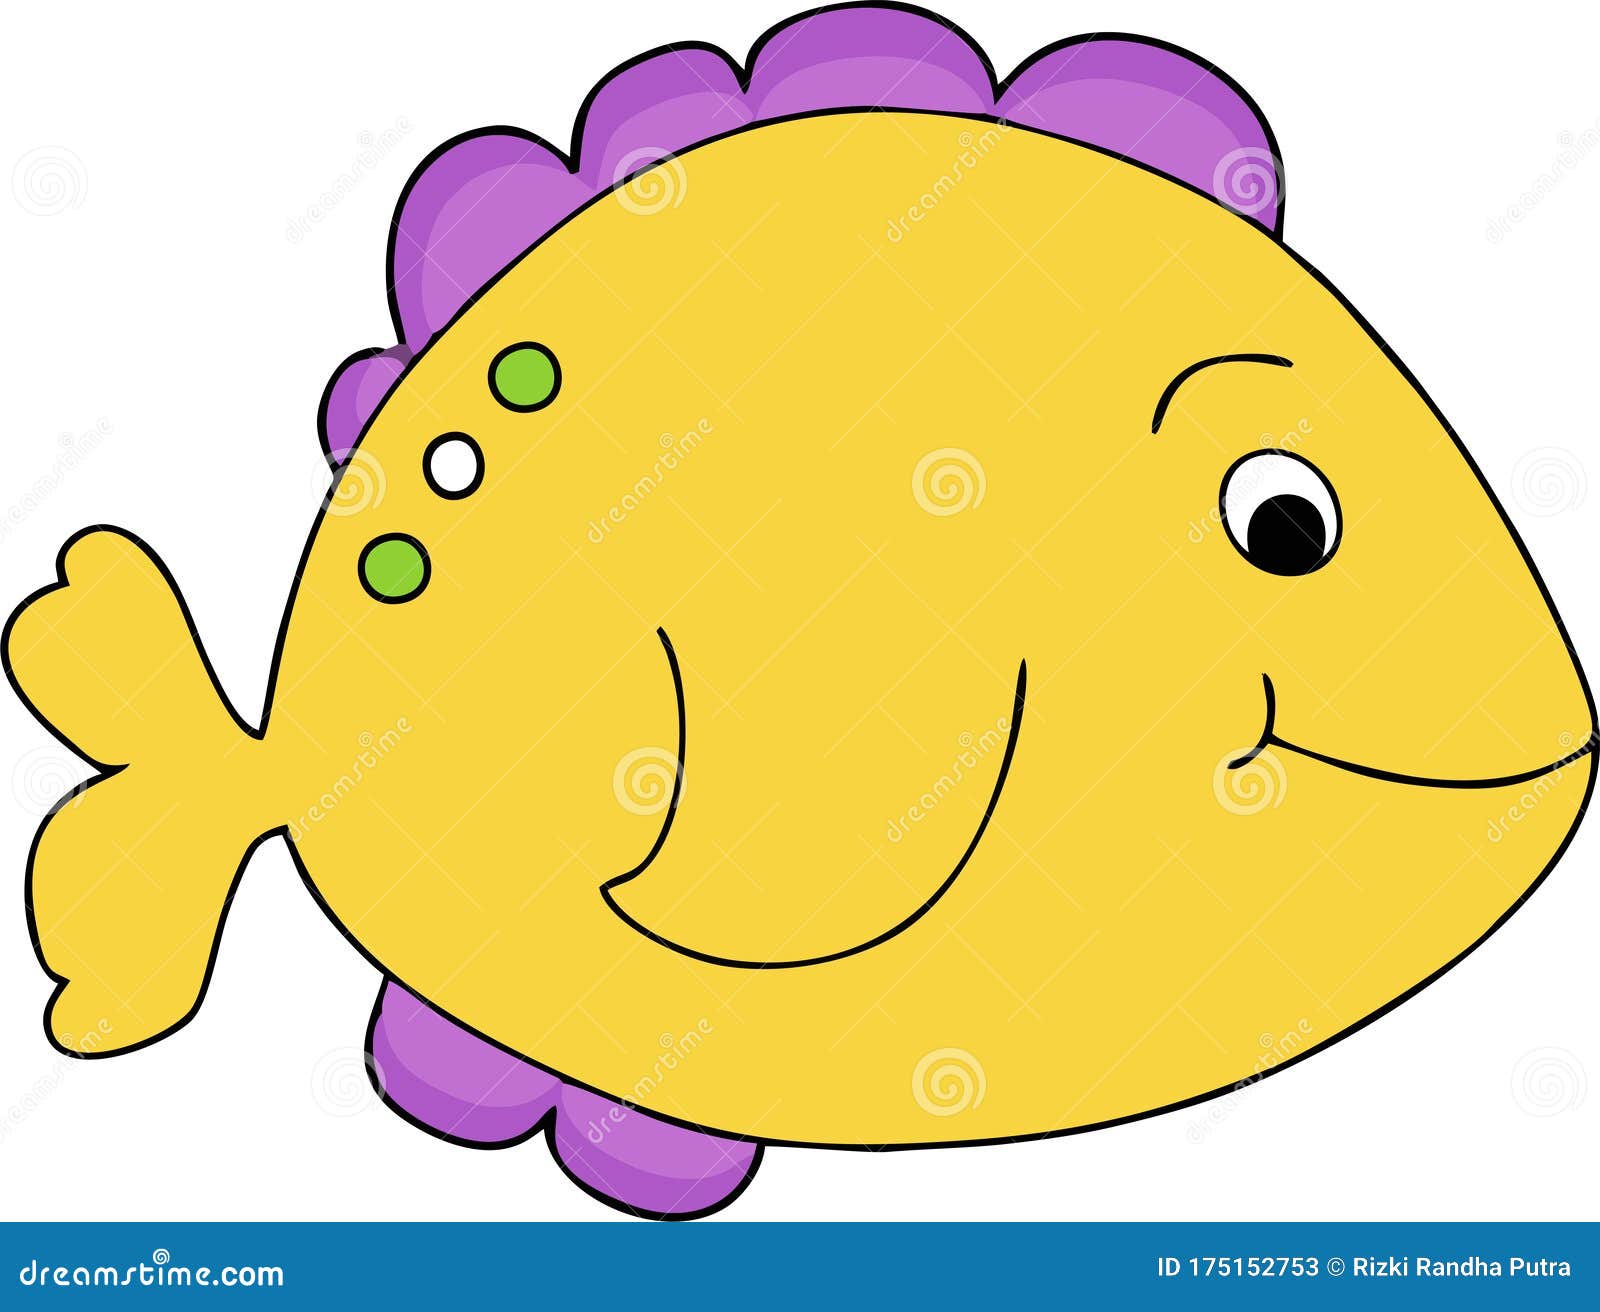 High Quality Vector Animated Yellow Fish Stock Vector - Illustration of cute,  design: 175152753